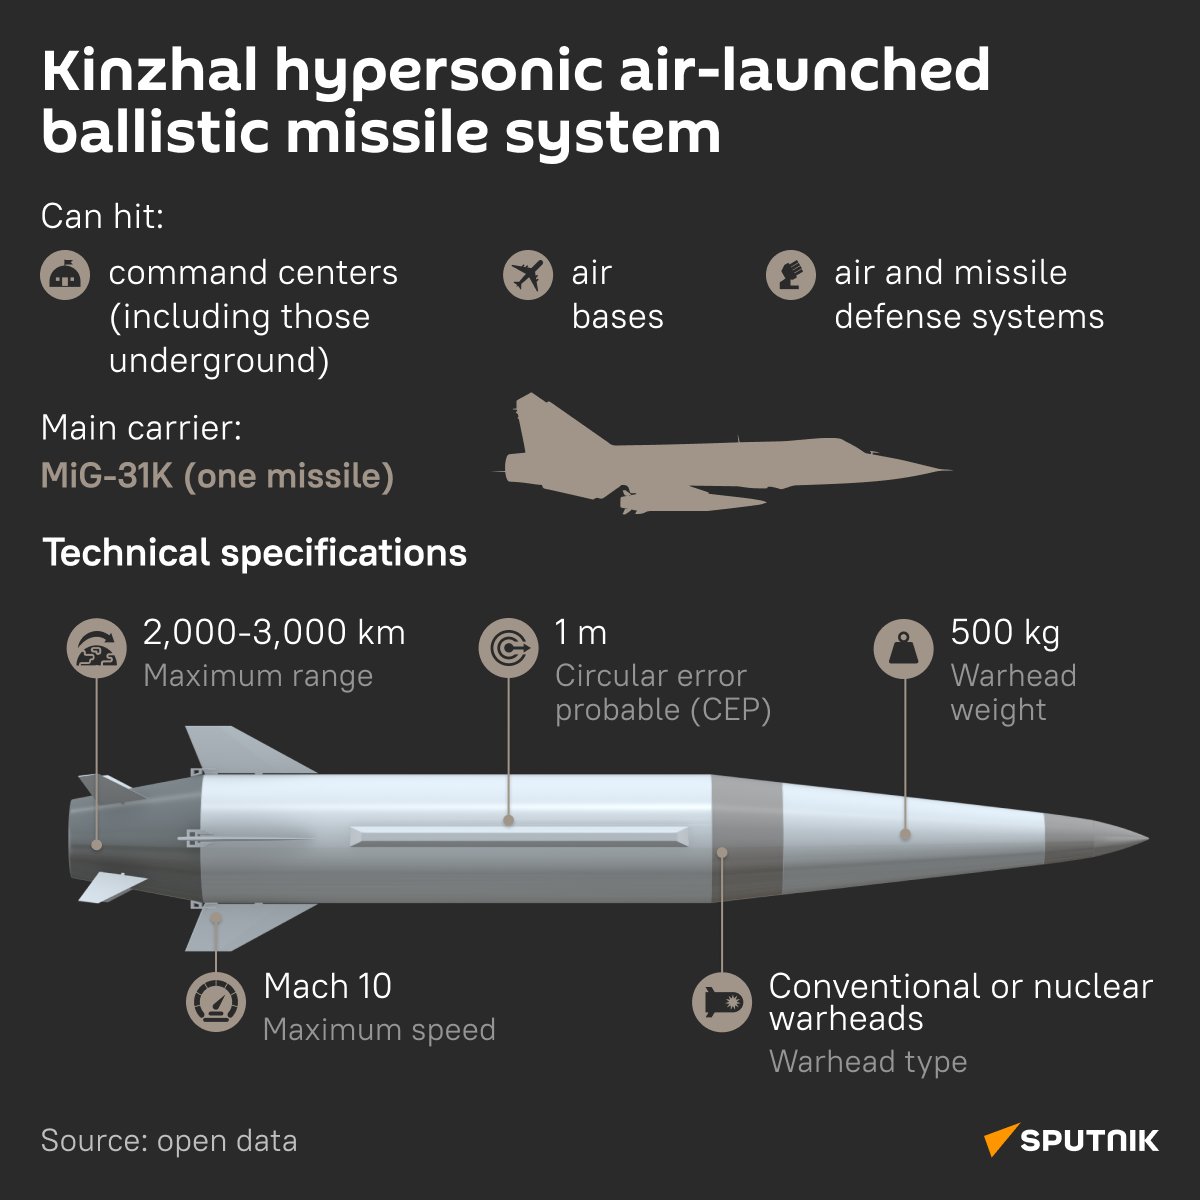 🇷🇺 Take a look at Russia's powerful Kinzhal #hypersonicmissile.

The Kh-47M2 Kinzhal is capable of reaching a staggering speed of up to Mach 10 and striking targets as far as 3,000 kilometers away.

#Russia #missile #weapons